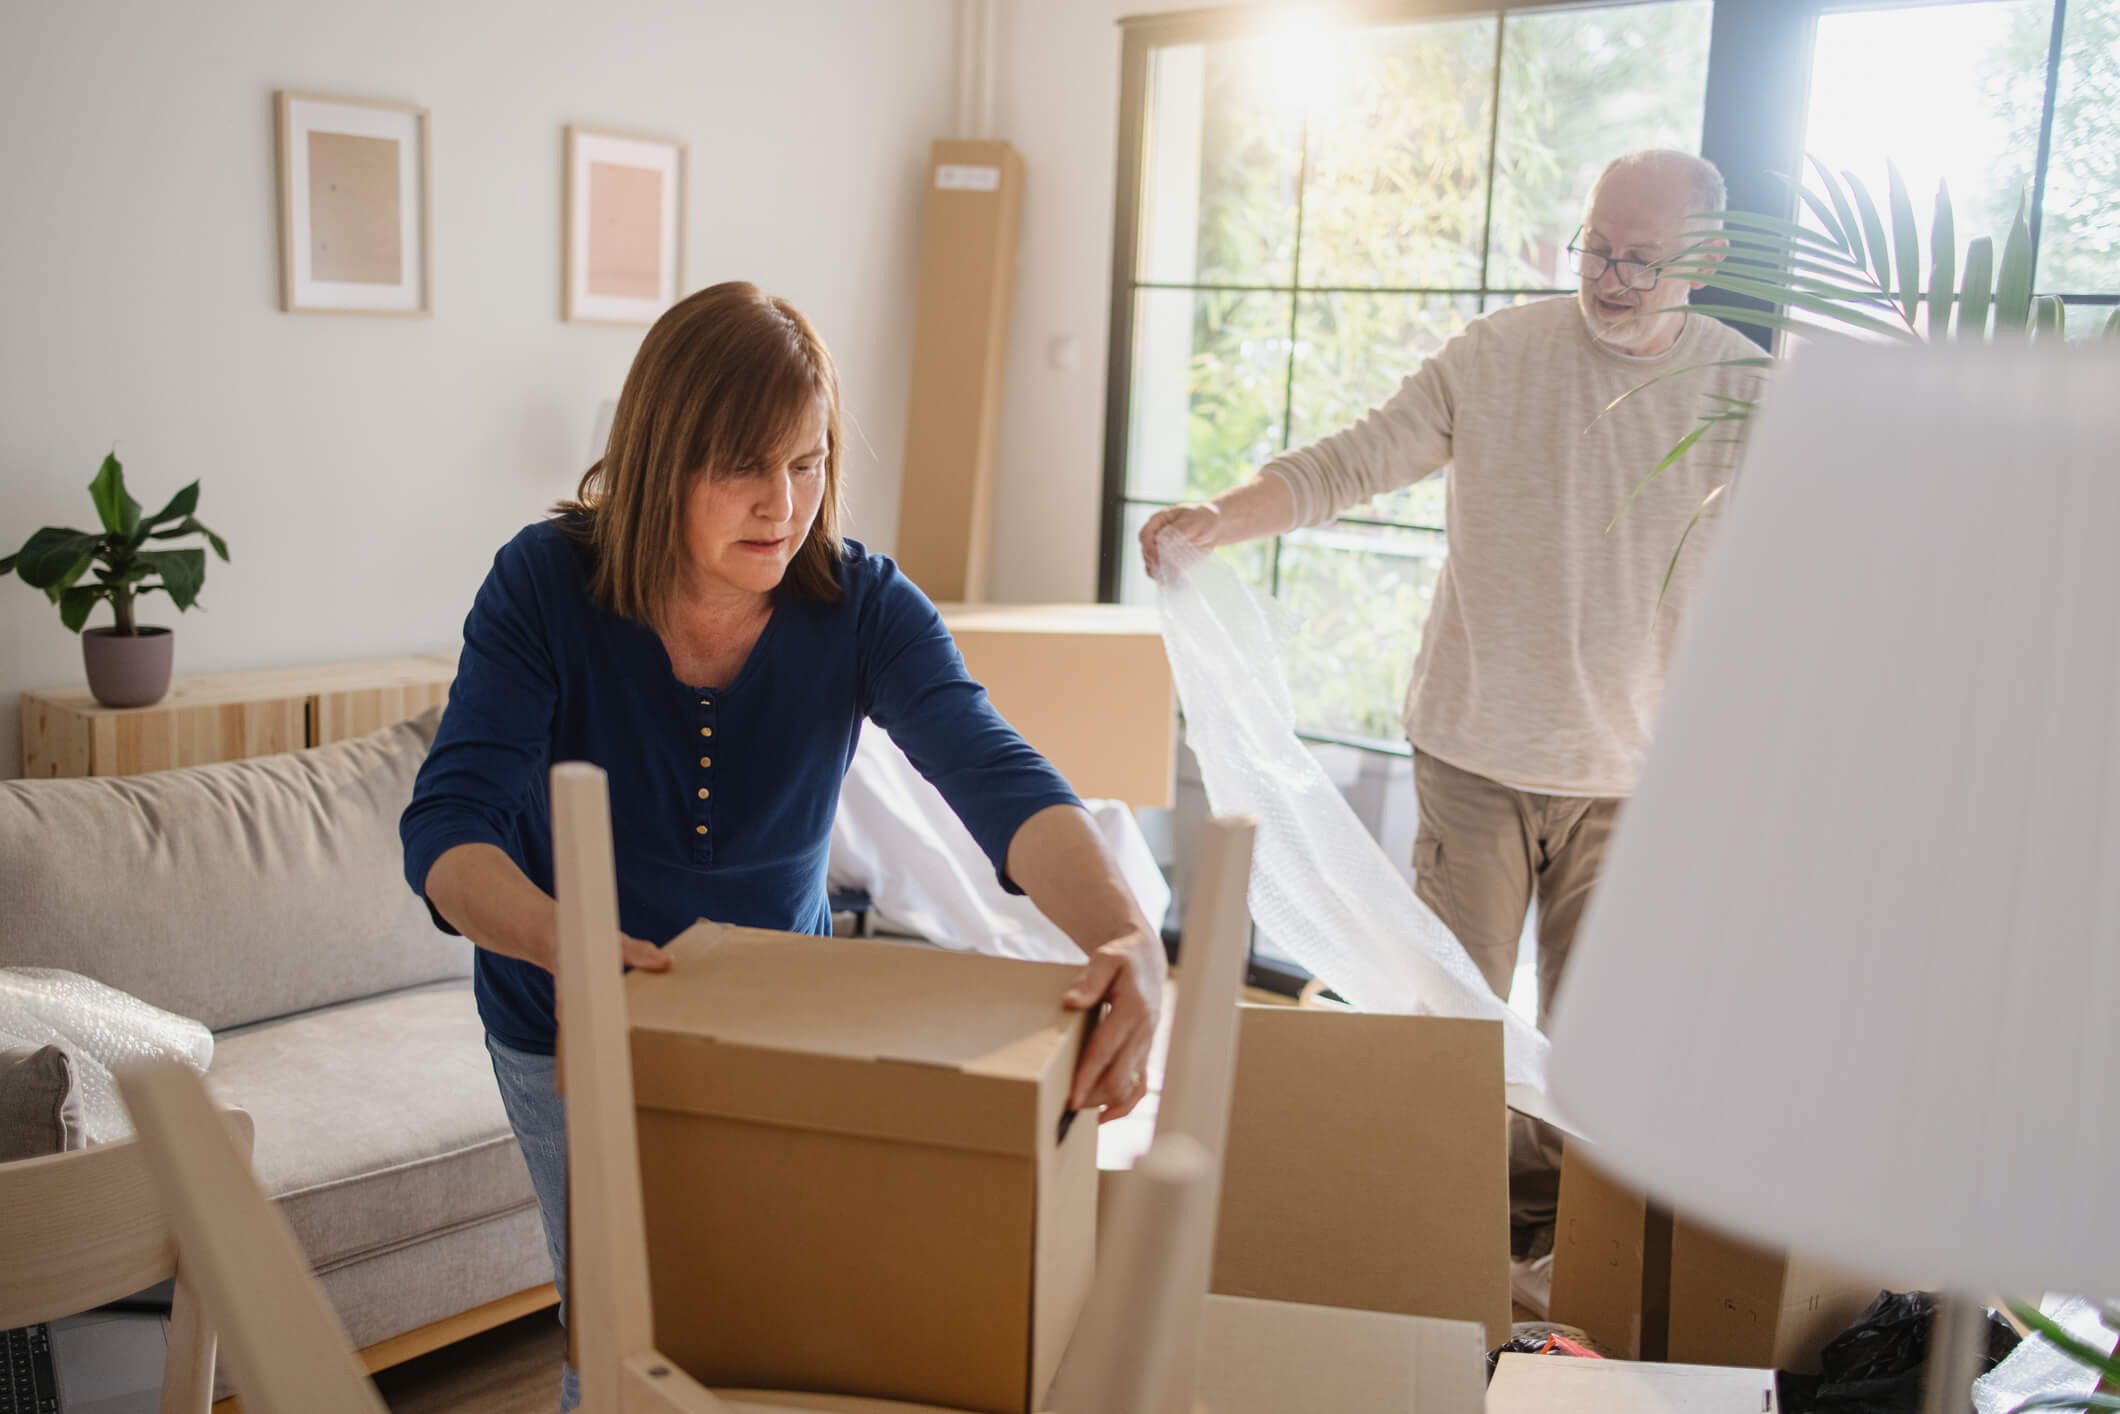 The Do’s and Don’ts of Downsizing